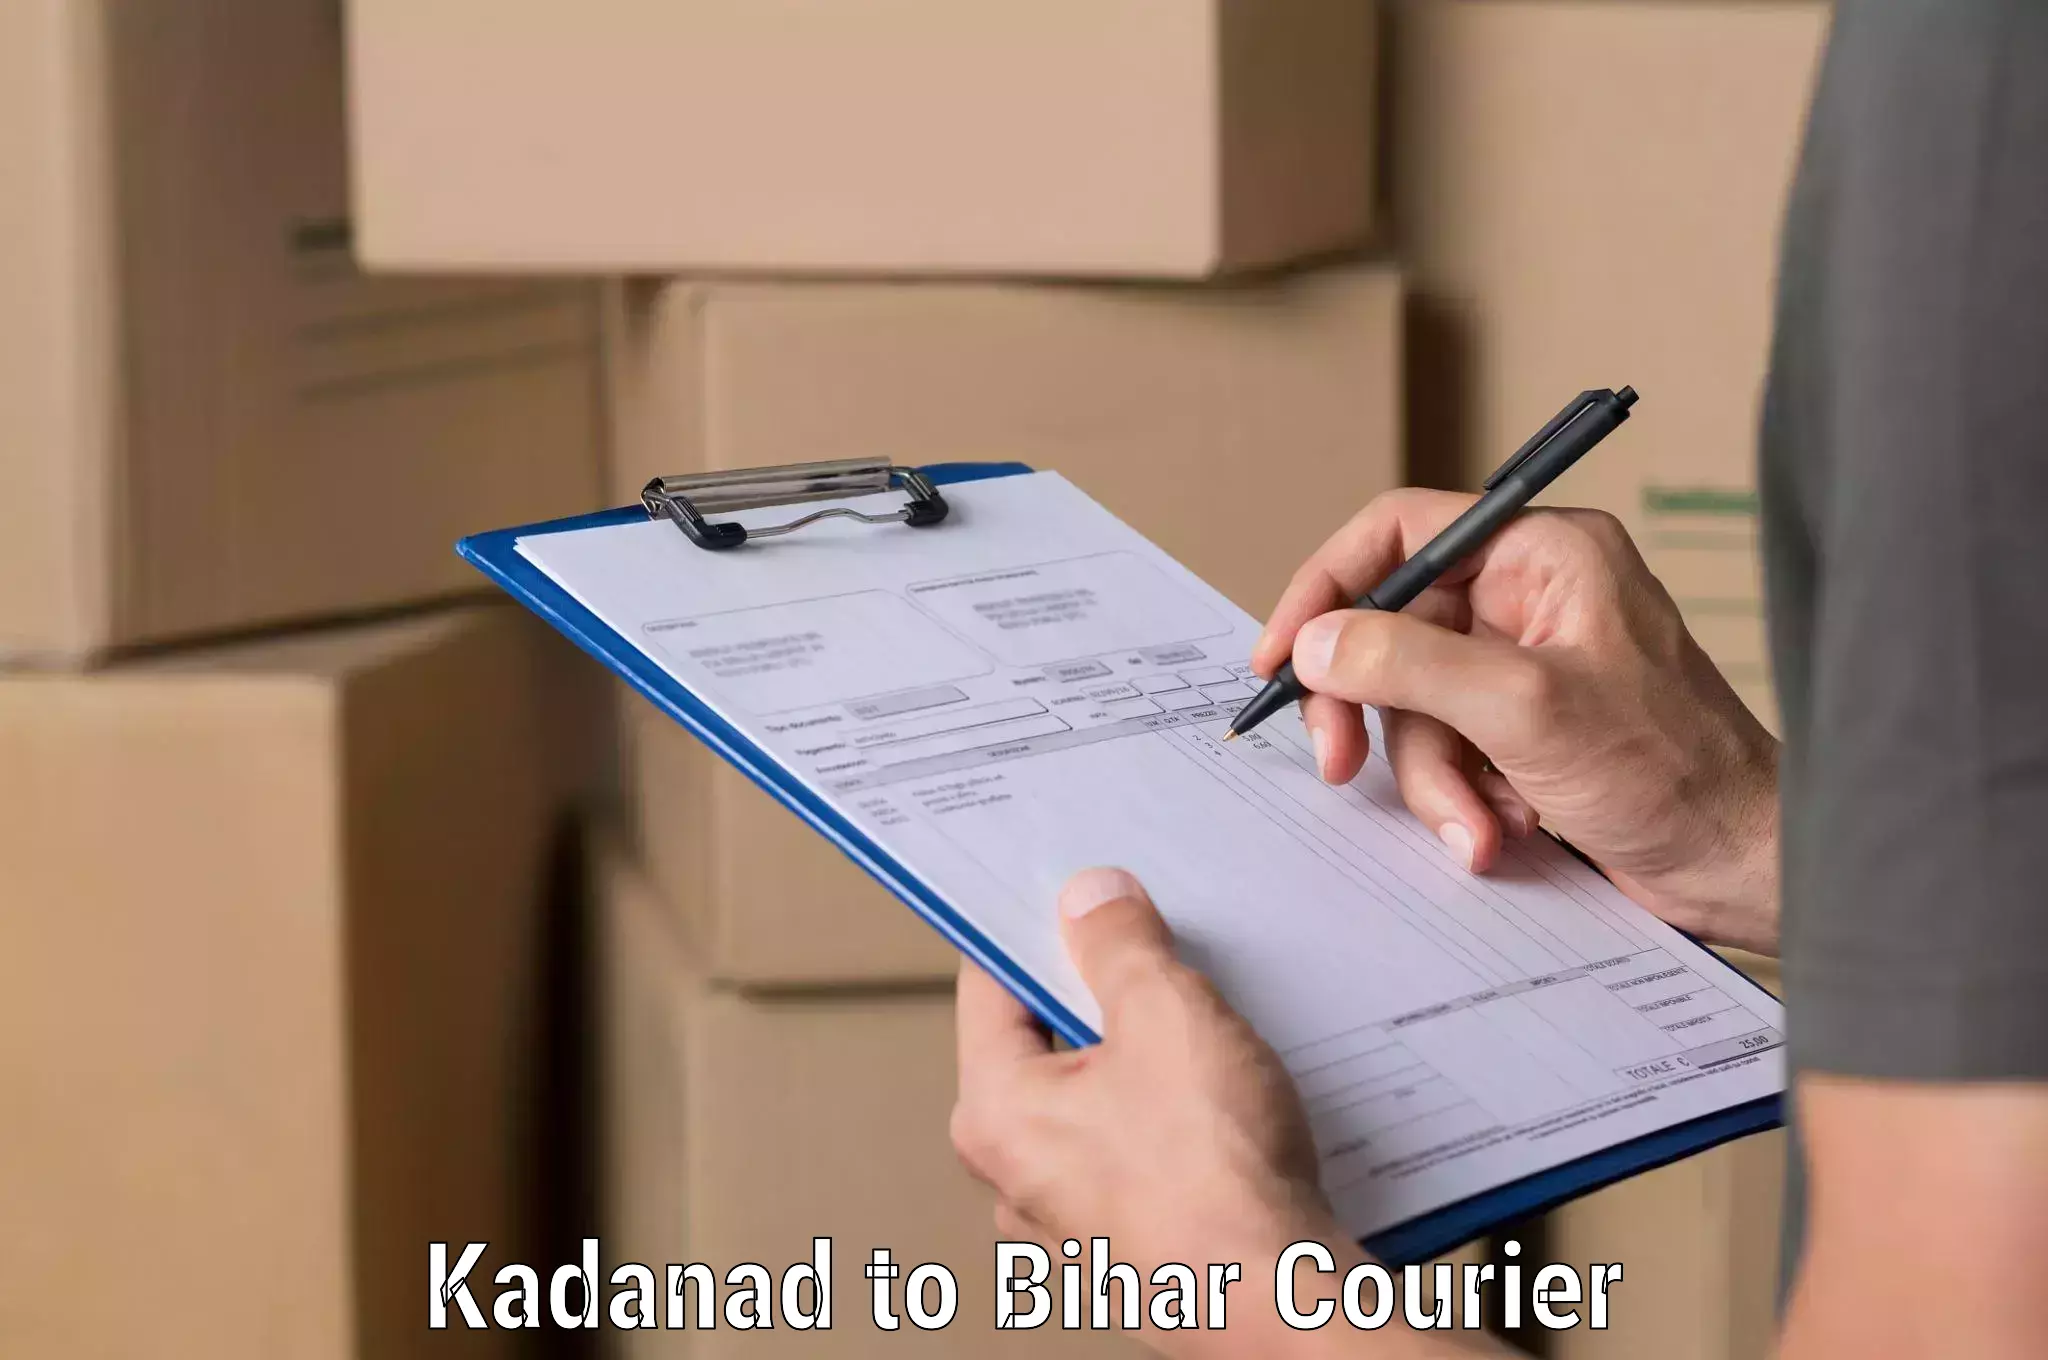 State-of-the-art courier technology Kadanad to Bihar